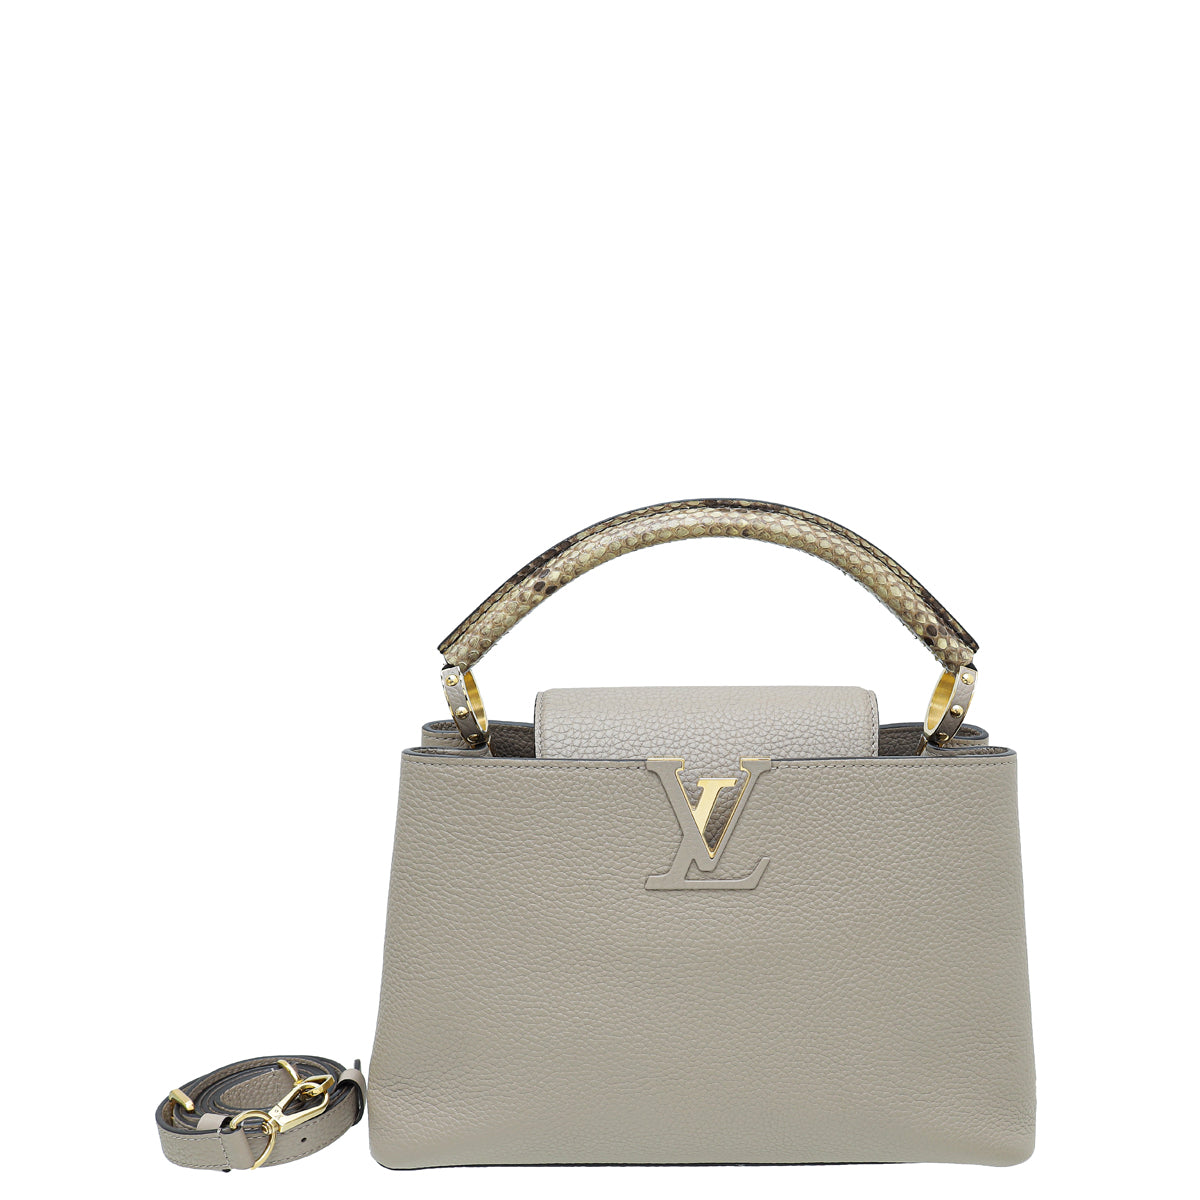 LOUIS VUITTON GREY CAPUCINES with PYTHON HANDLE BB HAND BAG